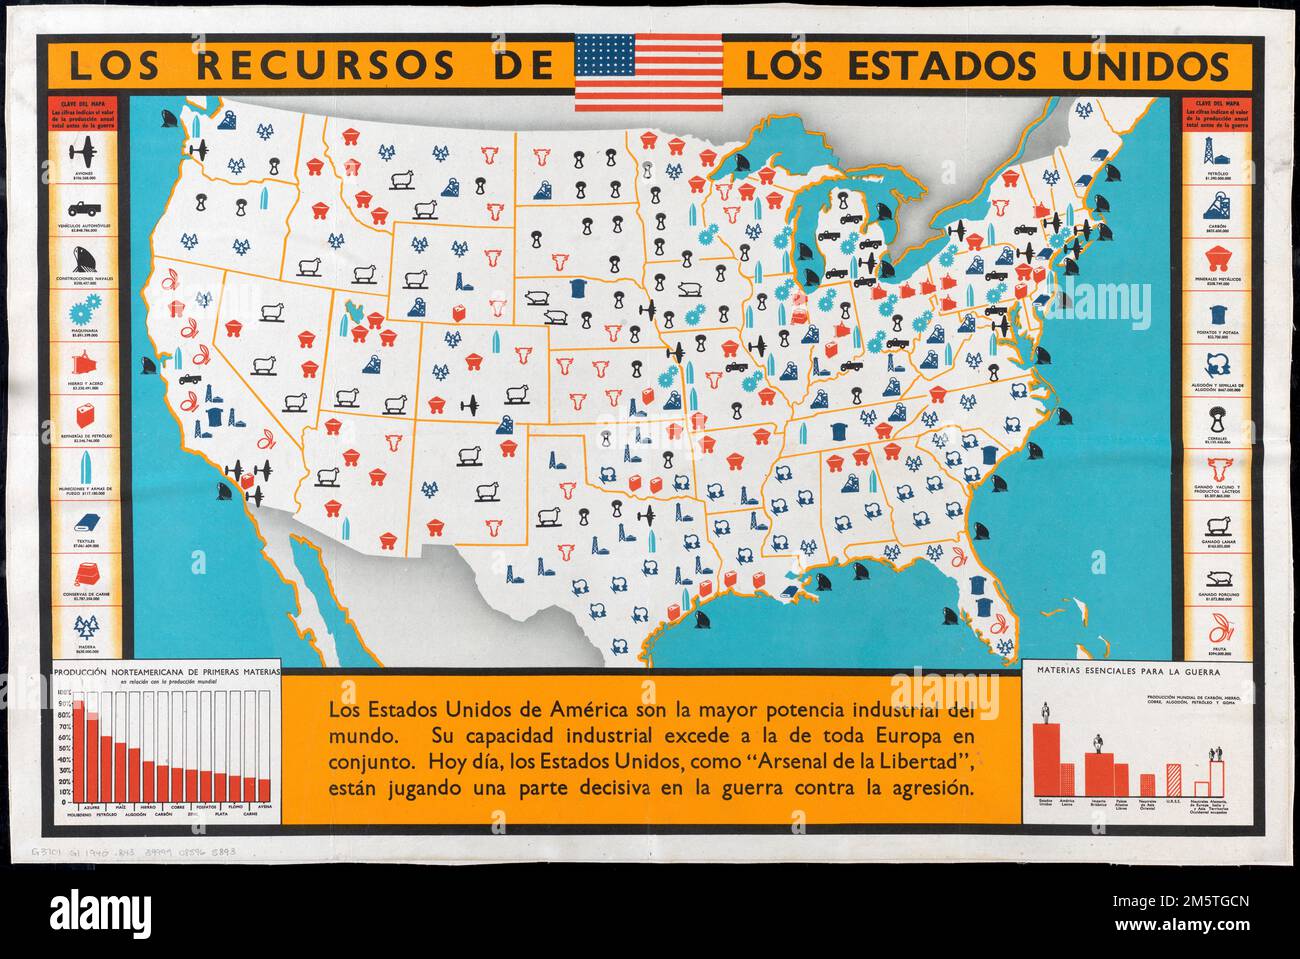 Los recursos de los Estados Unidos. Key to symbols also lists the pre-war annual production value of the resources. Includes 2 charts: Producción Norteamericana de primeras materias en relación con la producción mundial -- Materias esenciales para la guerra.. Poster showing the resources and industries of the United States, declaring the U.S. the greatest industrial power and its importance in World War II. In the lower left is a chart showing the percentage of various raw materials produced in North America relative to the total produced worldwide. In the lower right is a chart comparing c Stock Photo